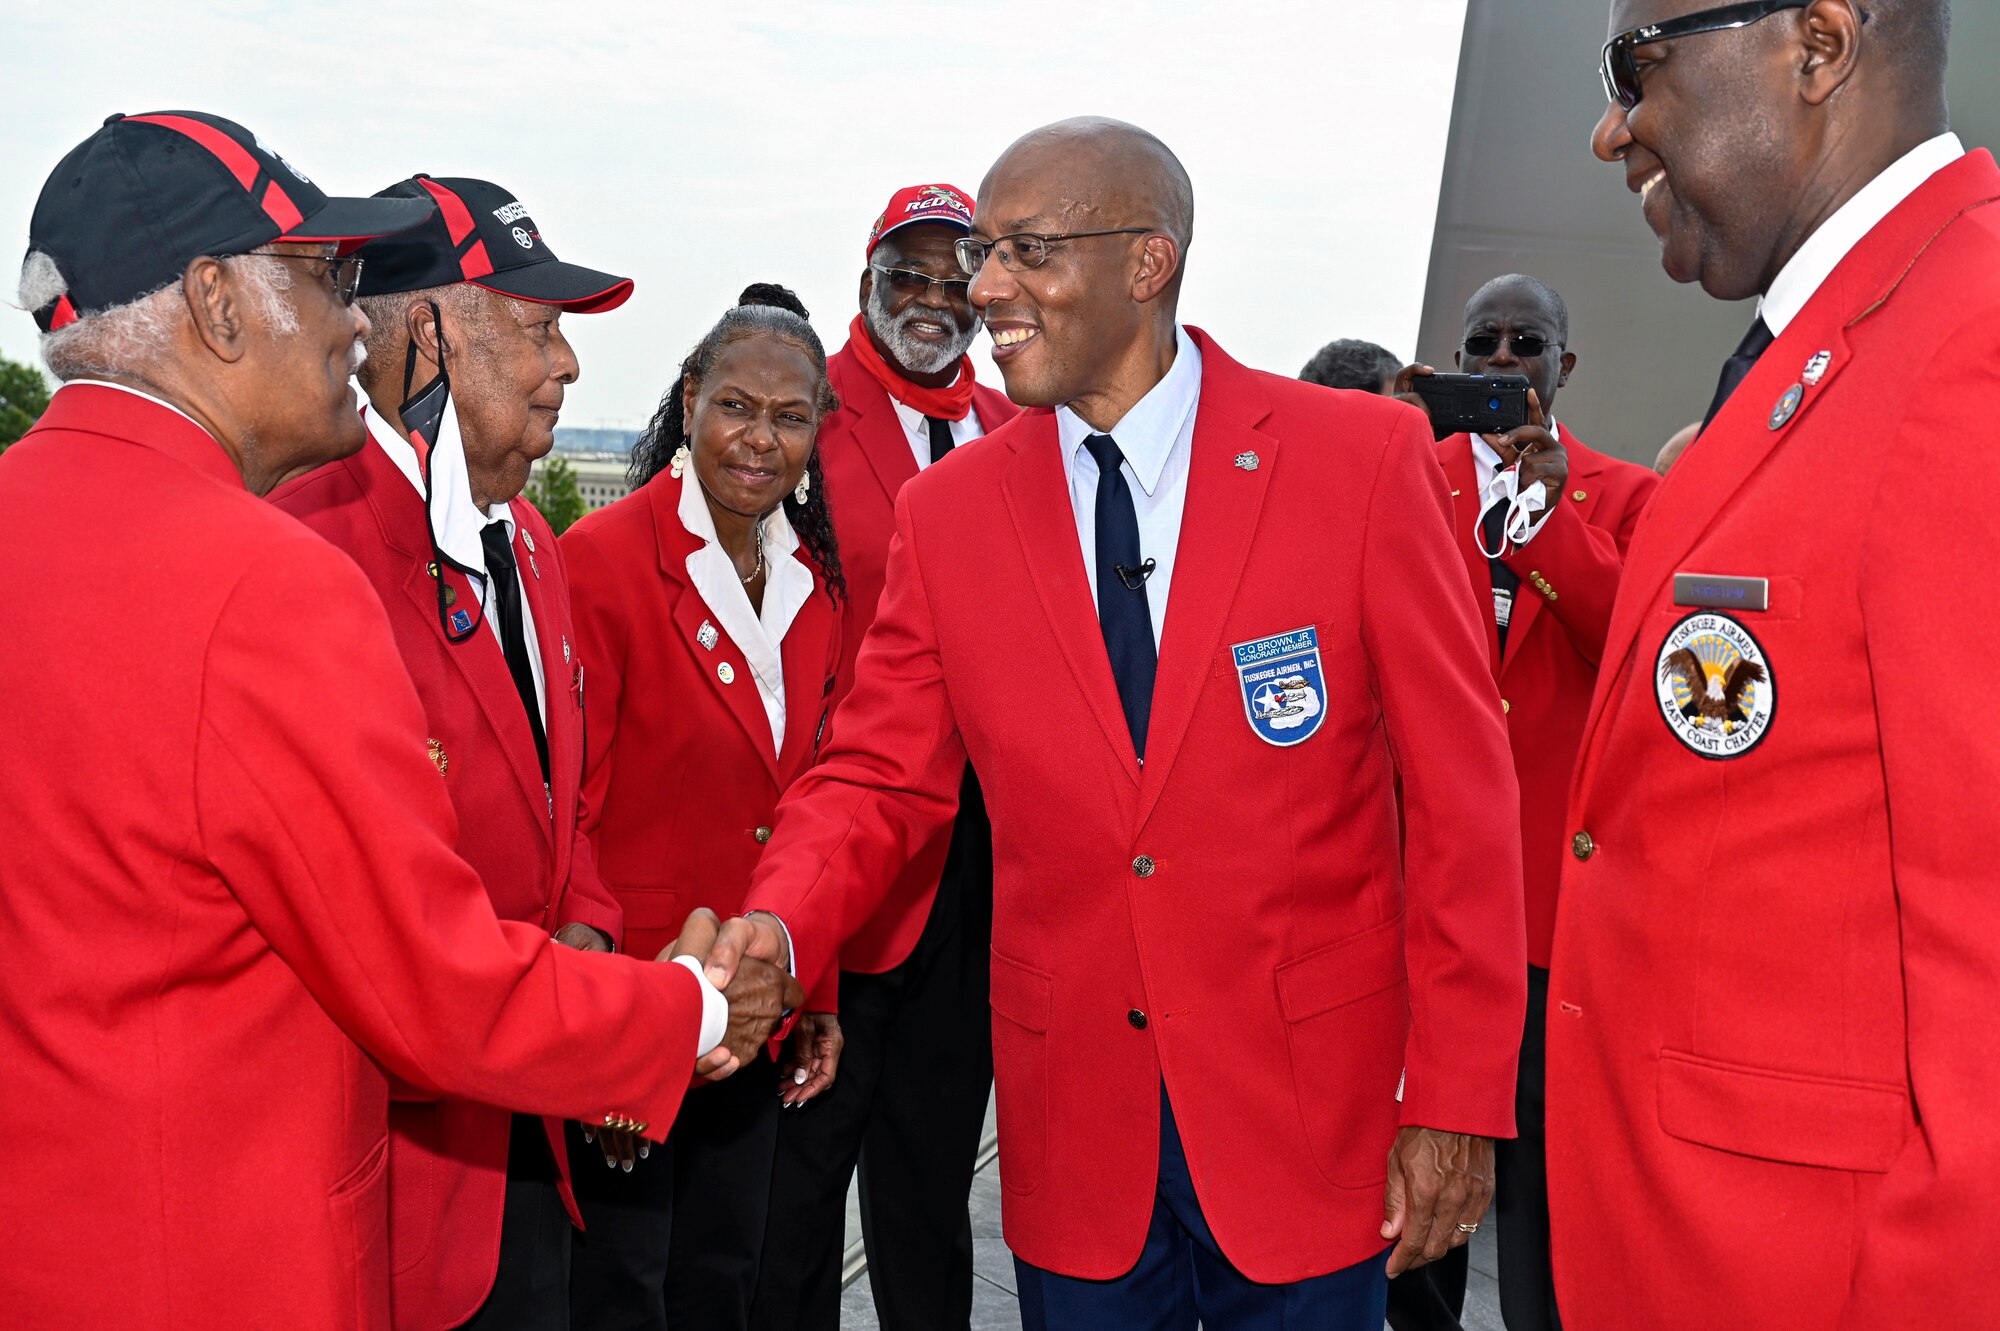 Air Force Chief of Staff Gen. CQ Brown, Jr. greets members of the Tuskegee Airmen